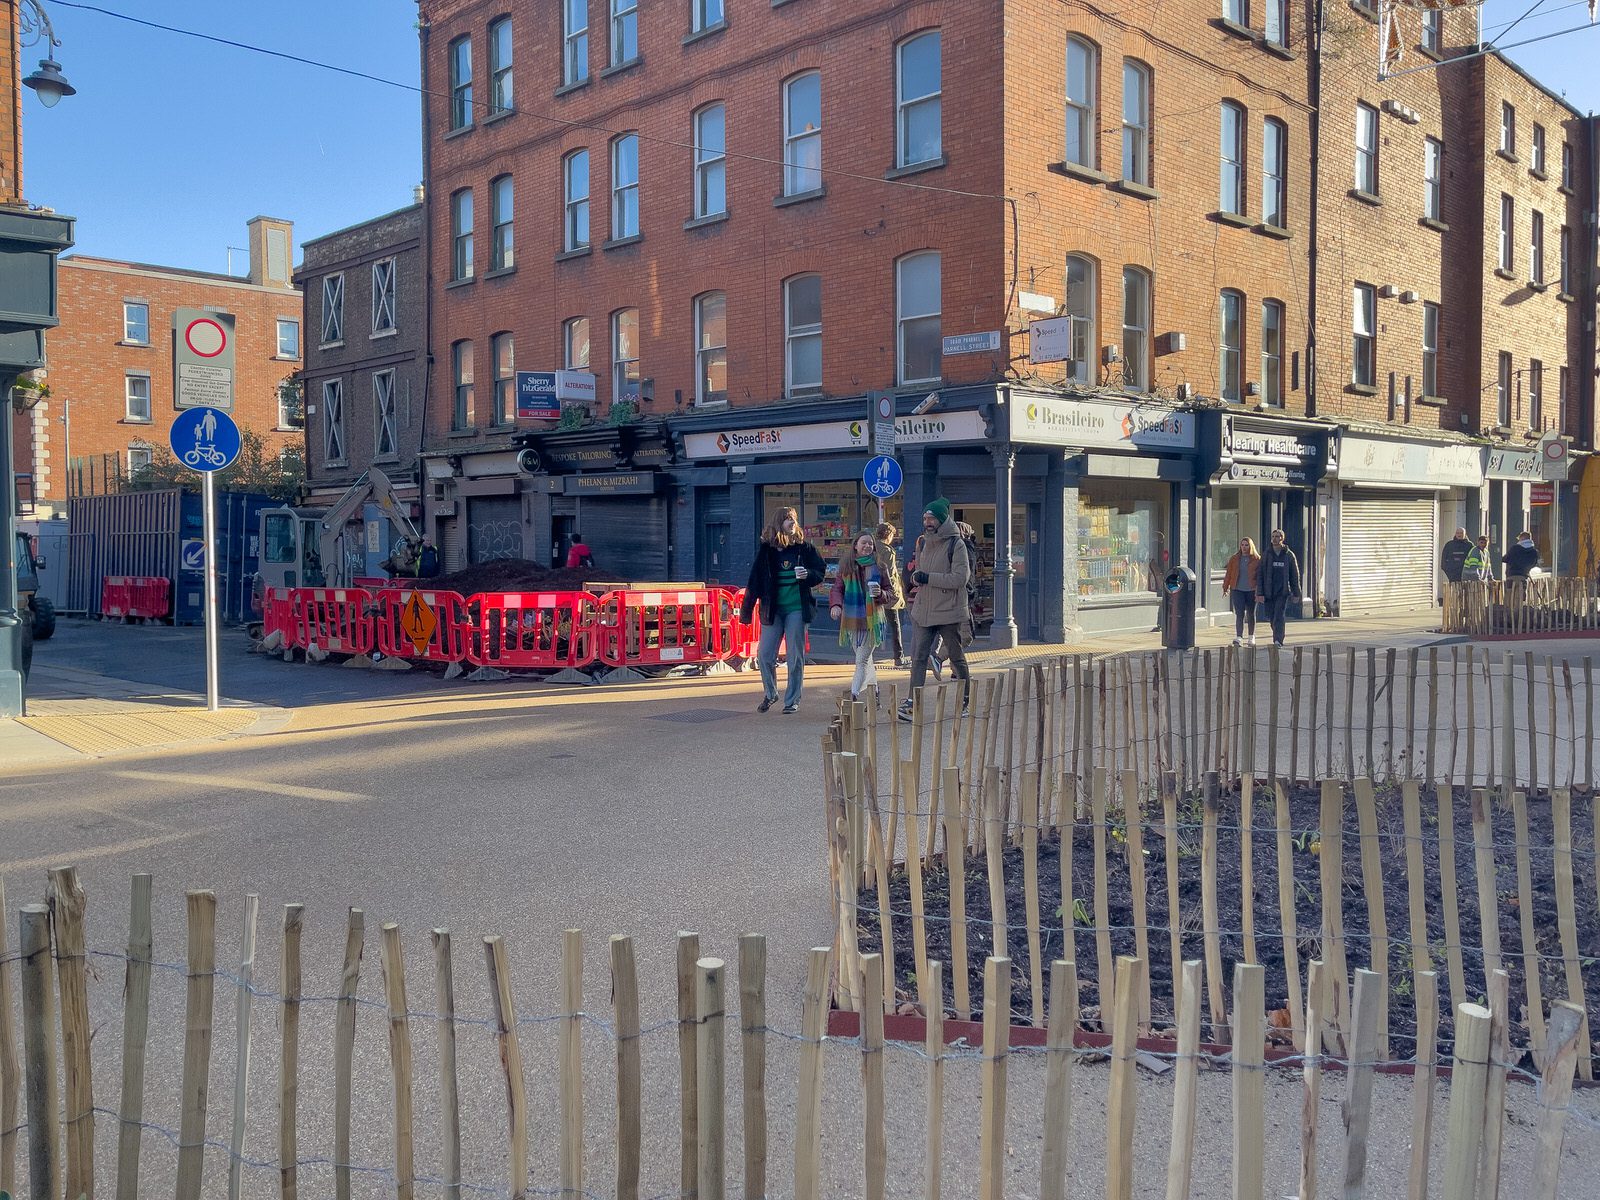 THE NEW STREET FURNITURE AND THE CHRISTMAS TREE [HAVE ARRIVED IN CAPEL STREET]-225849-1